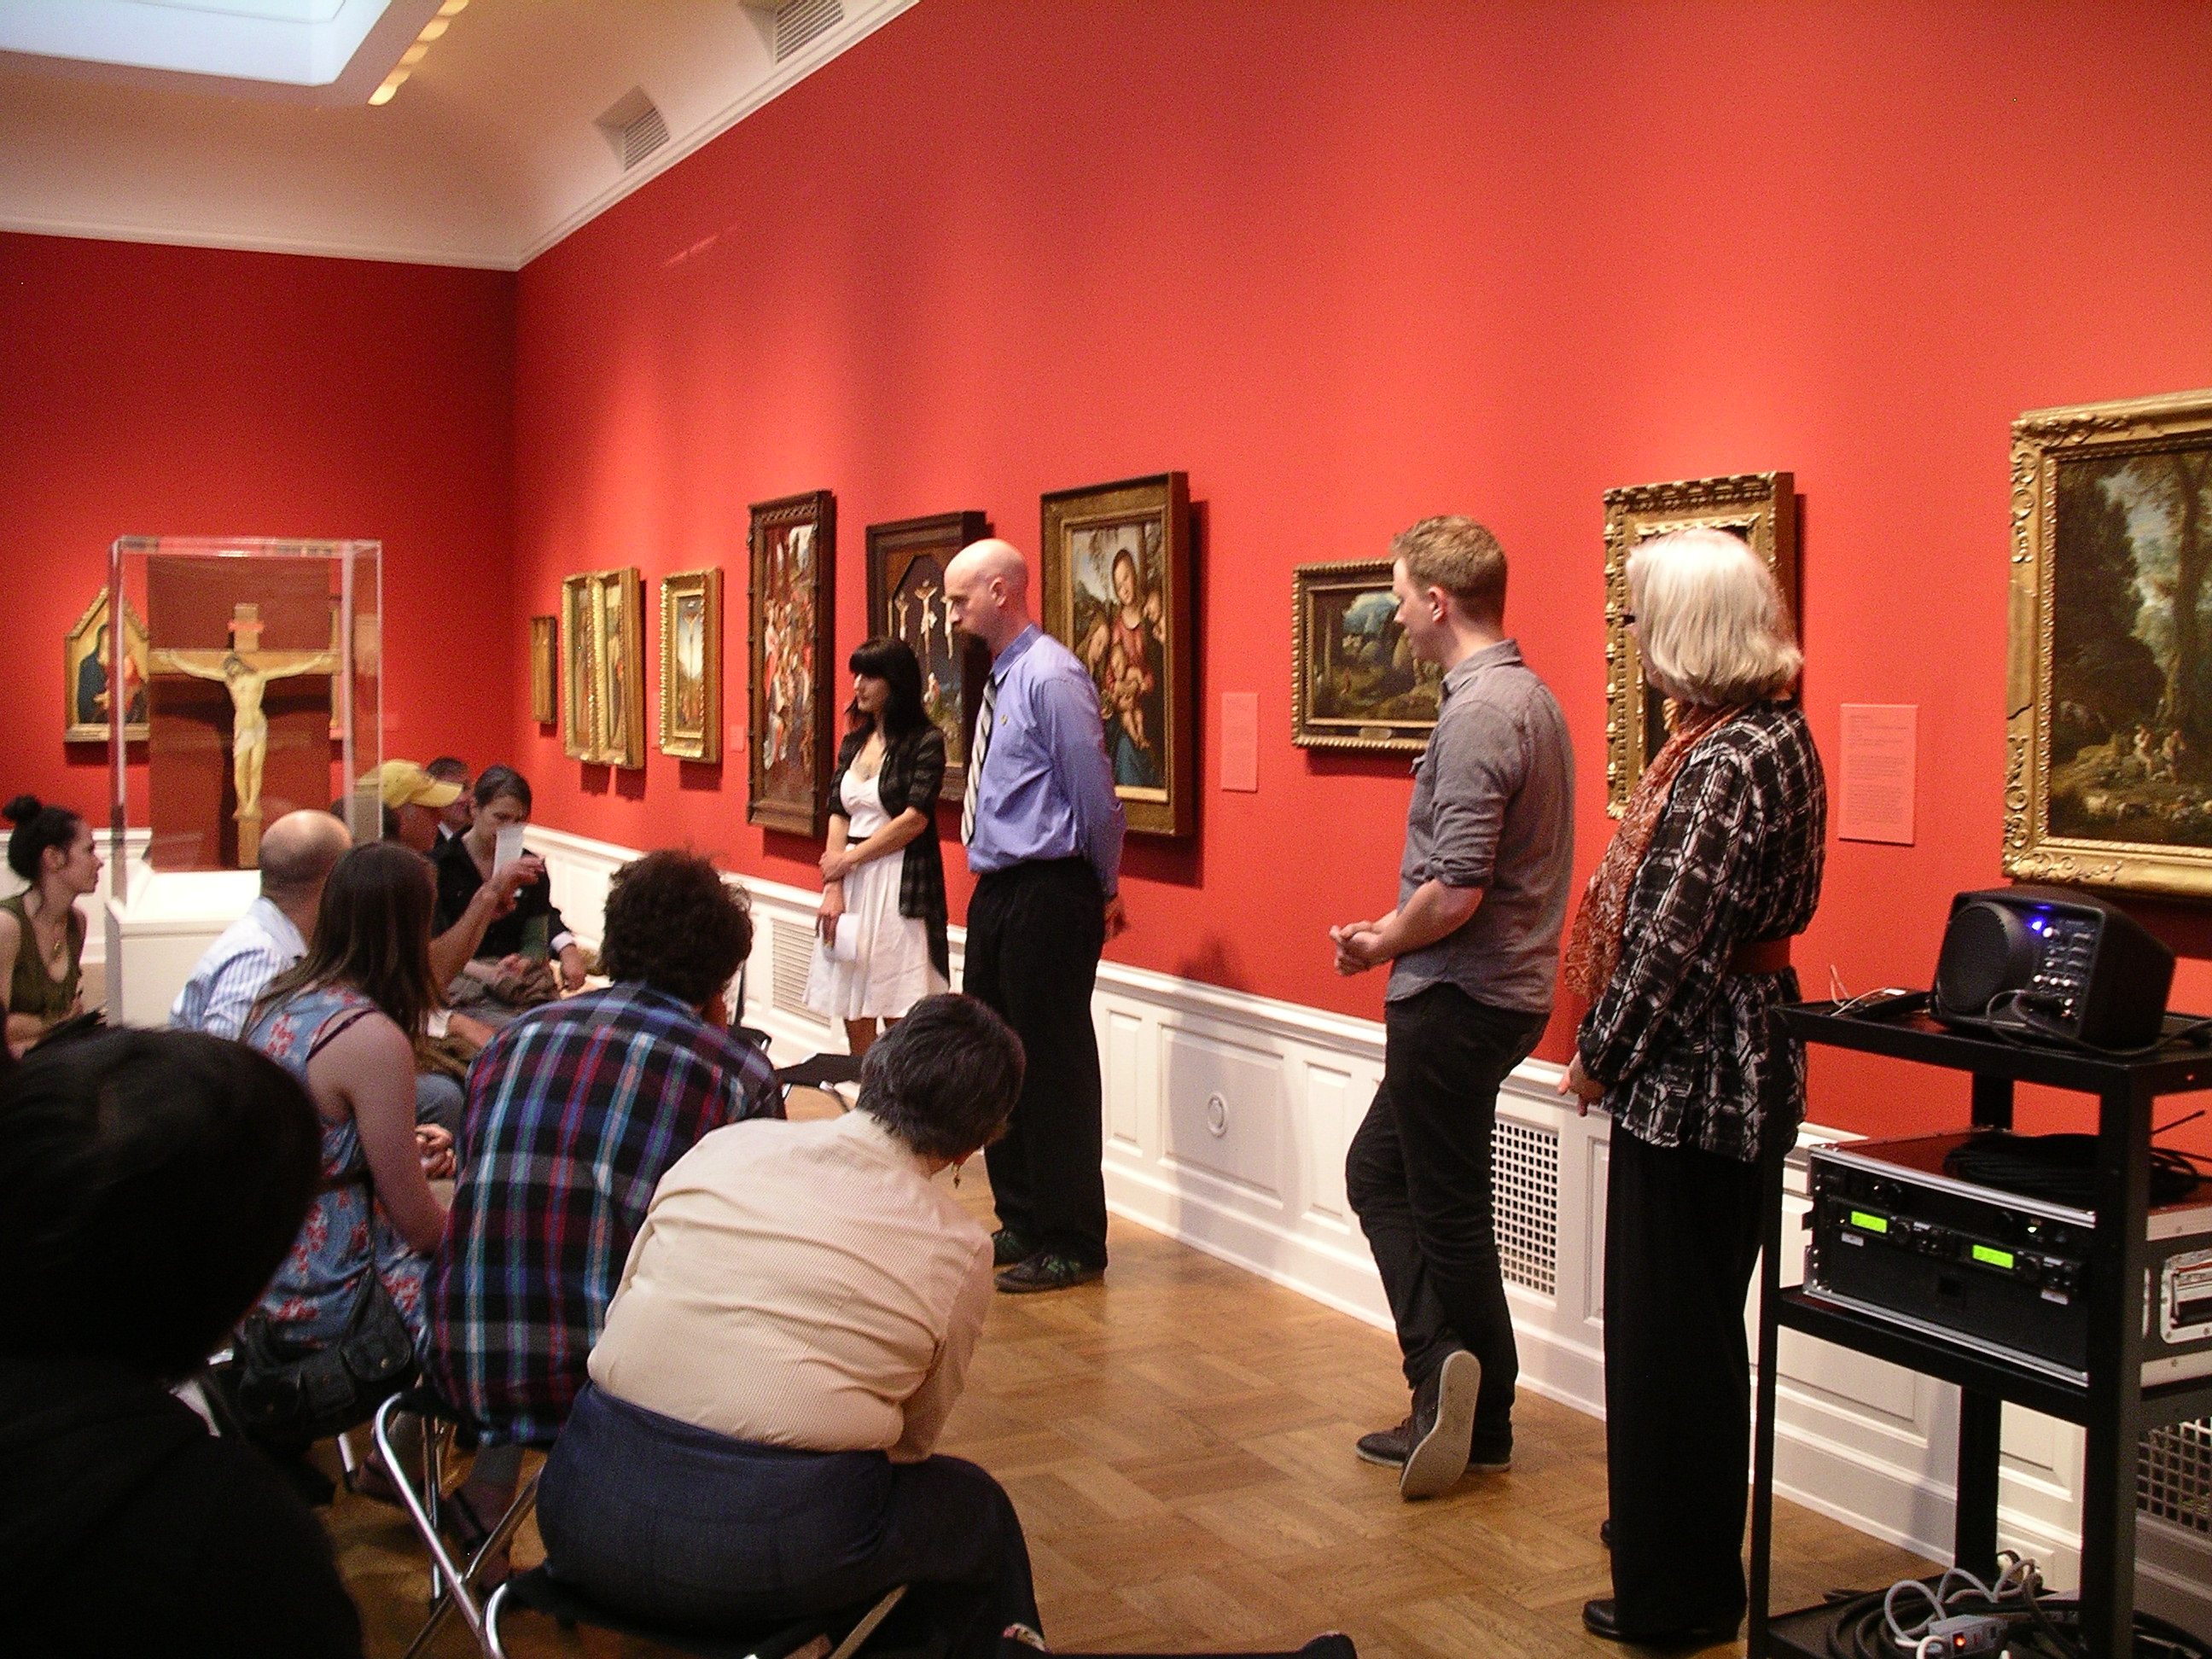 Students standing in front of paintings with an audience sitting on chairs in front of them.